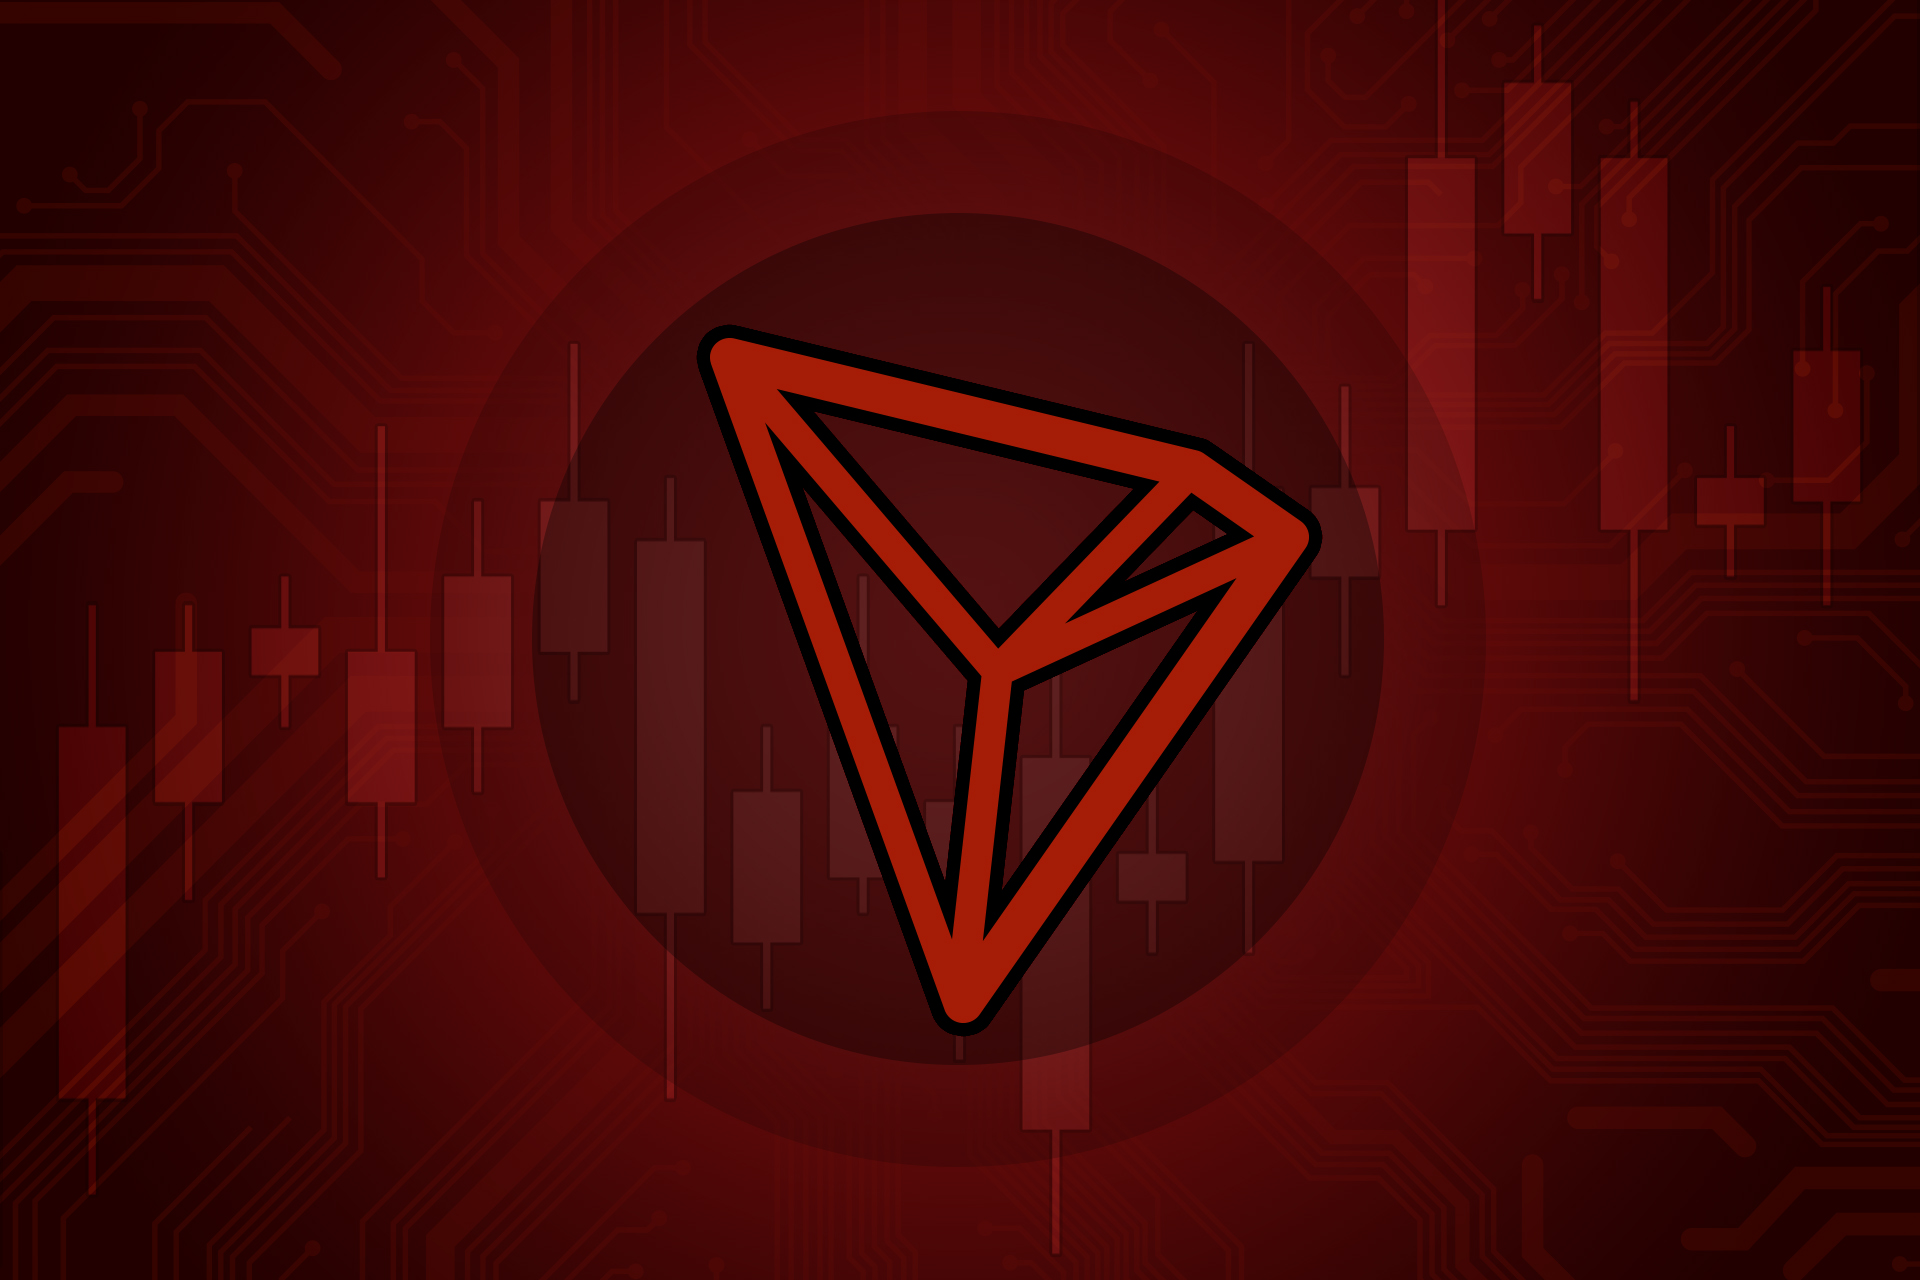 Tron cryptocurrency image free image download